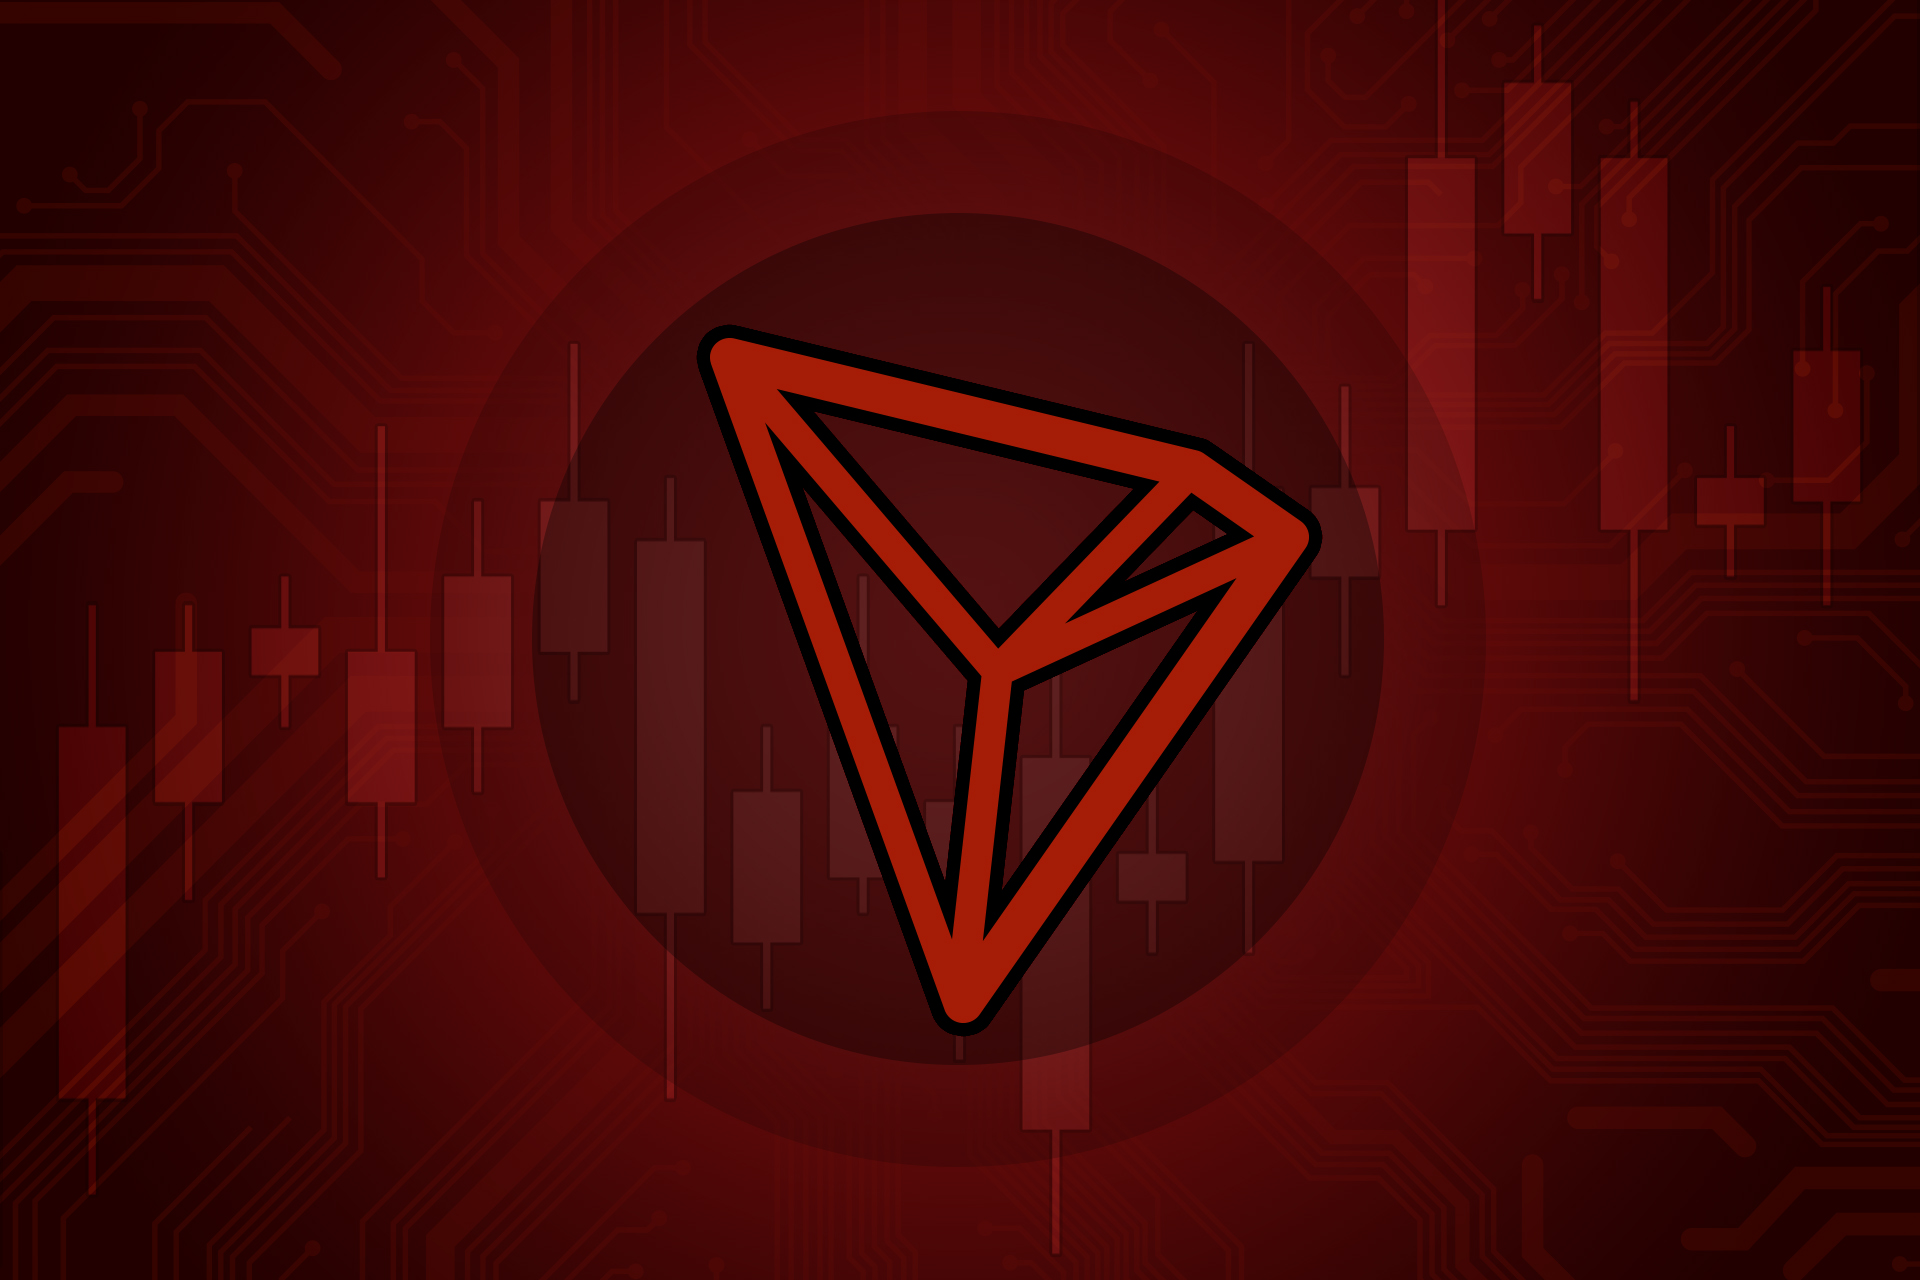 Tron cryptocurrency image free image download